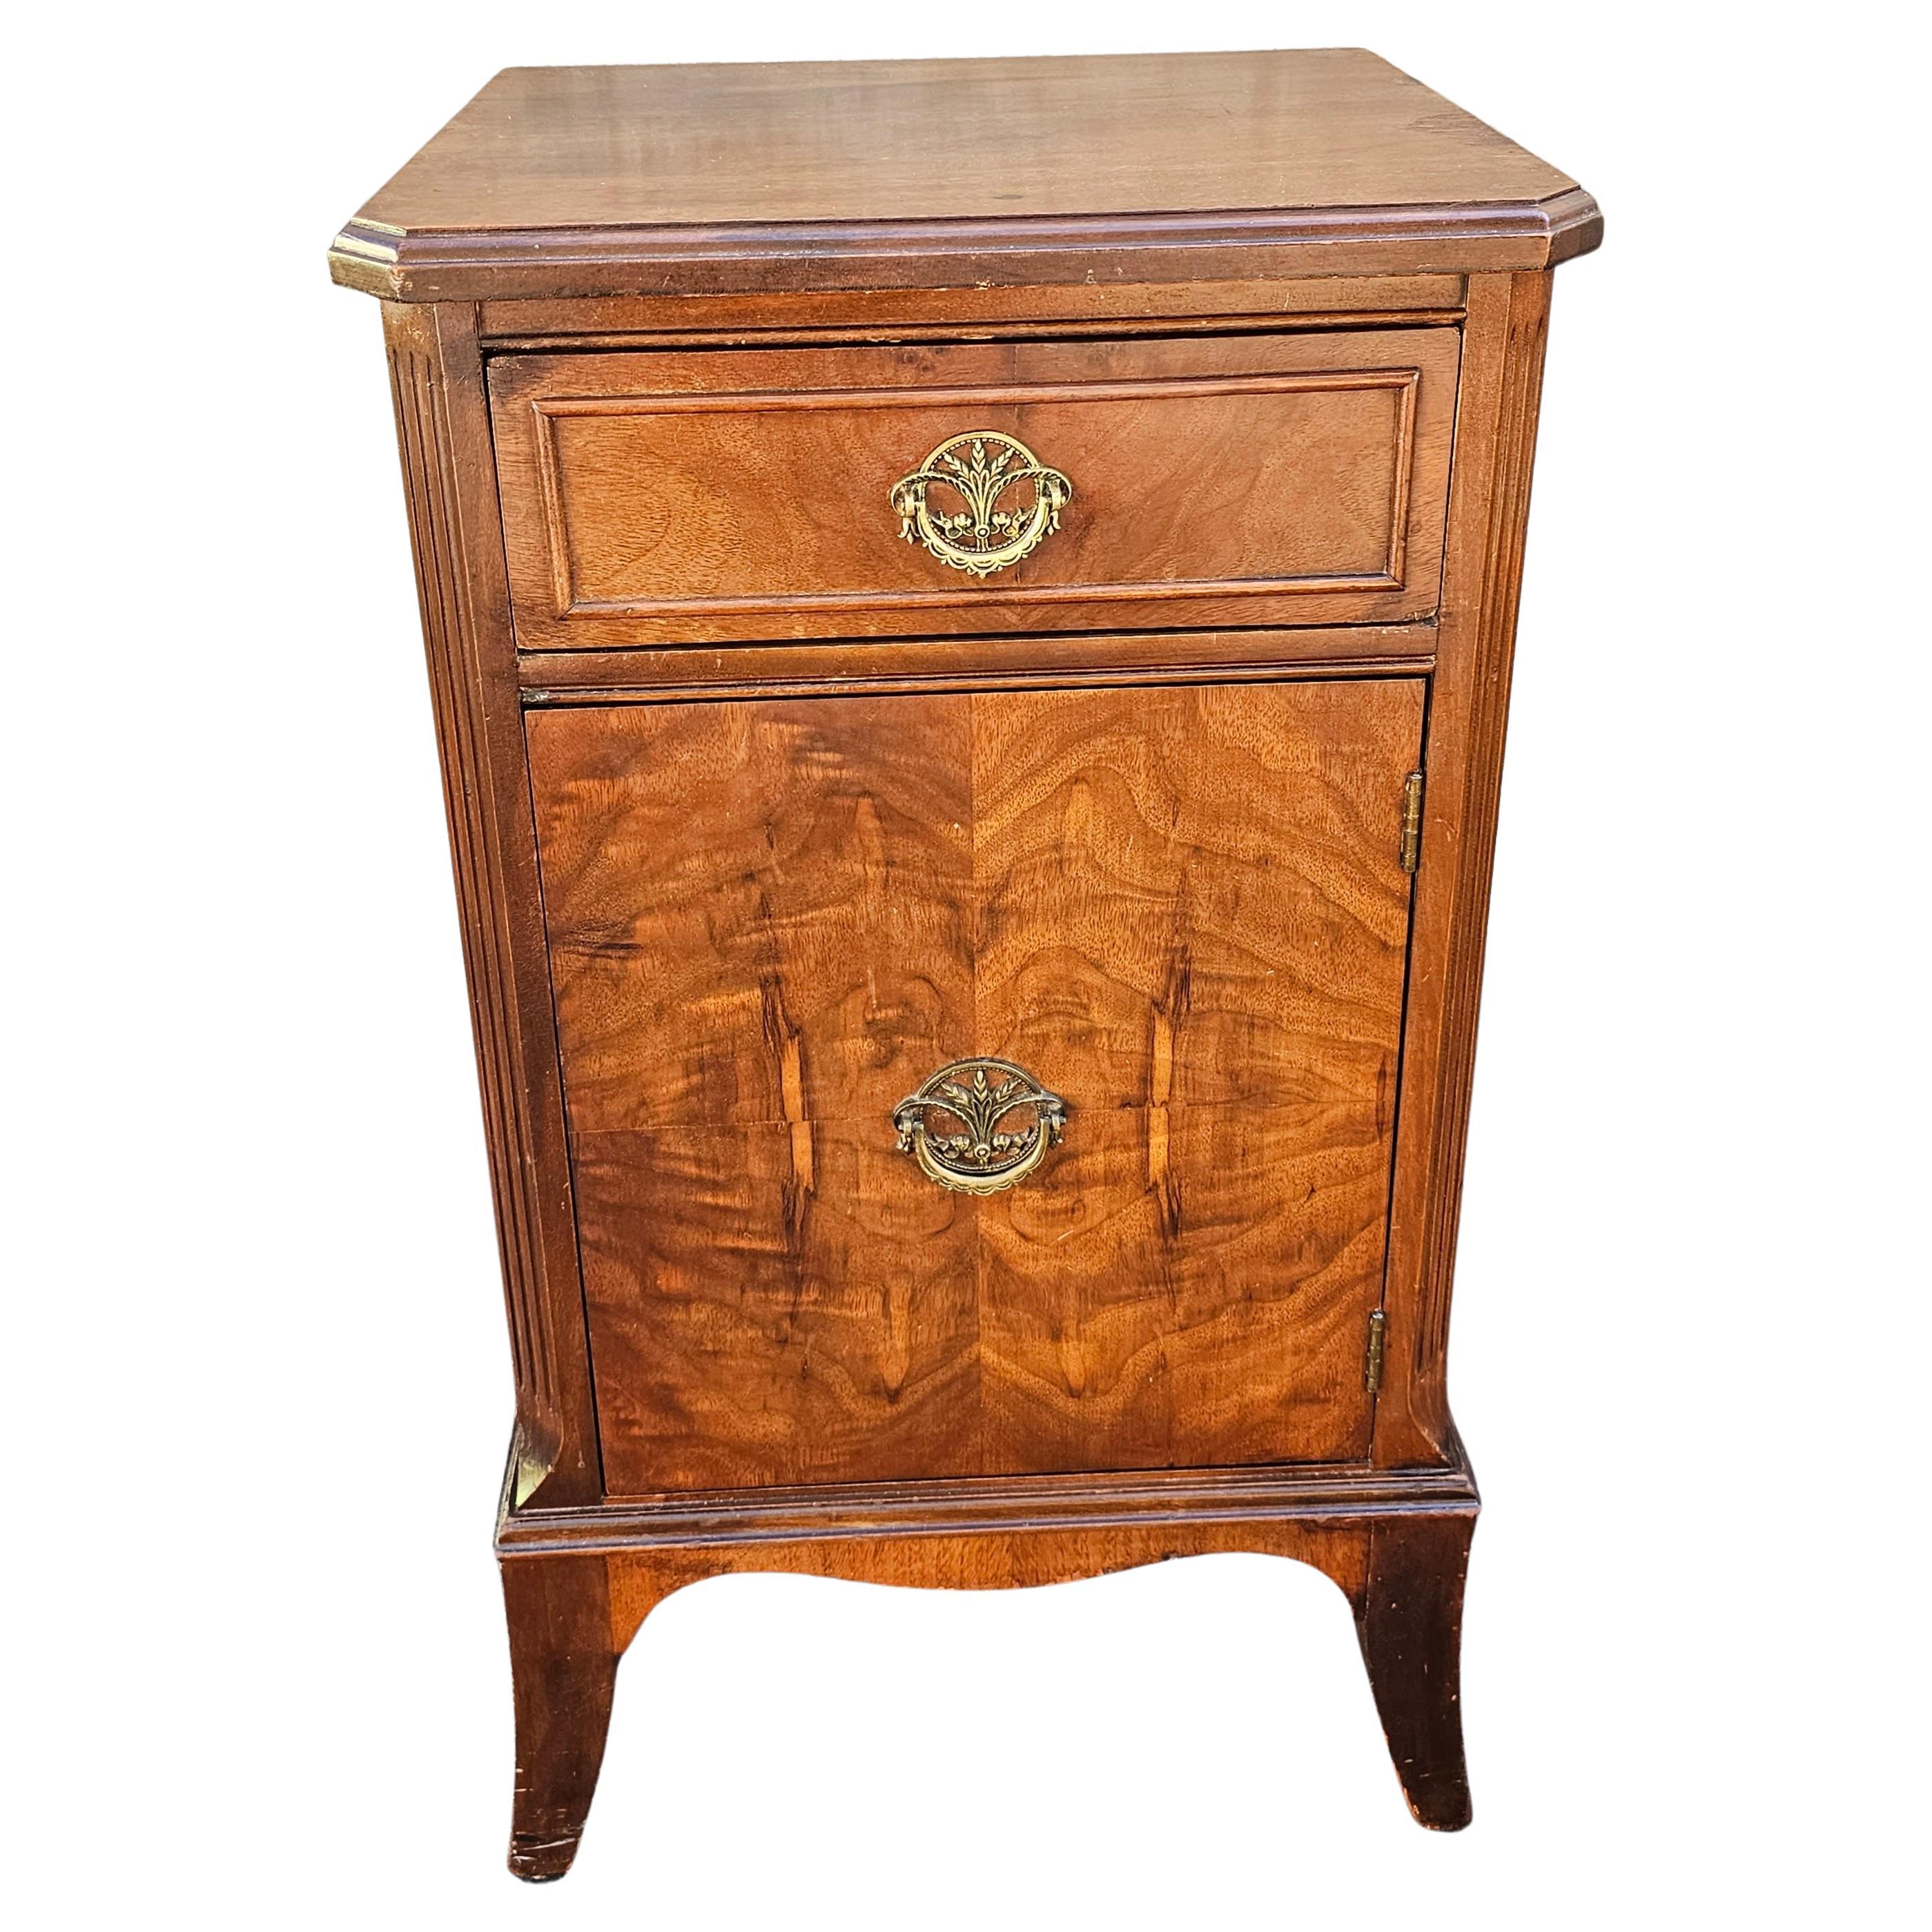 Early 20th Century Federal Style Burl Mahogany Nightstand Side Table Cabinet For Sale